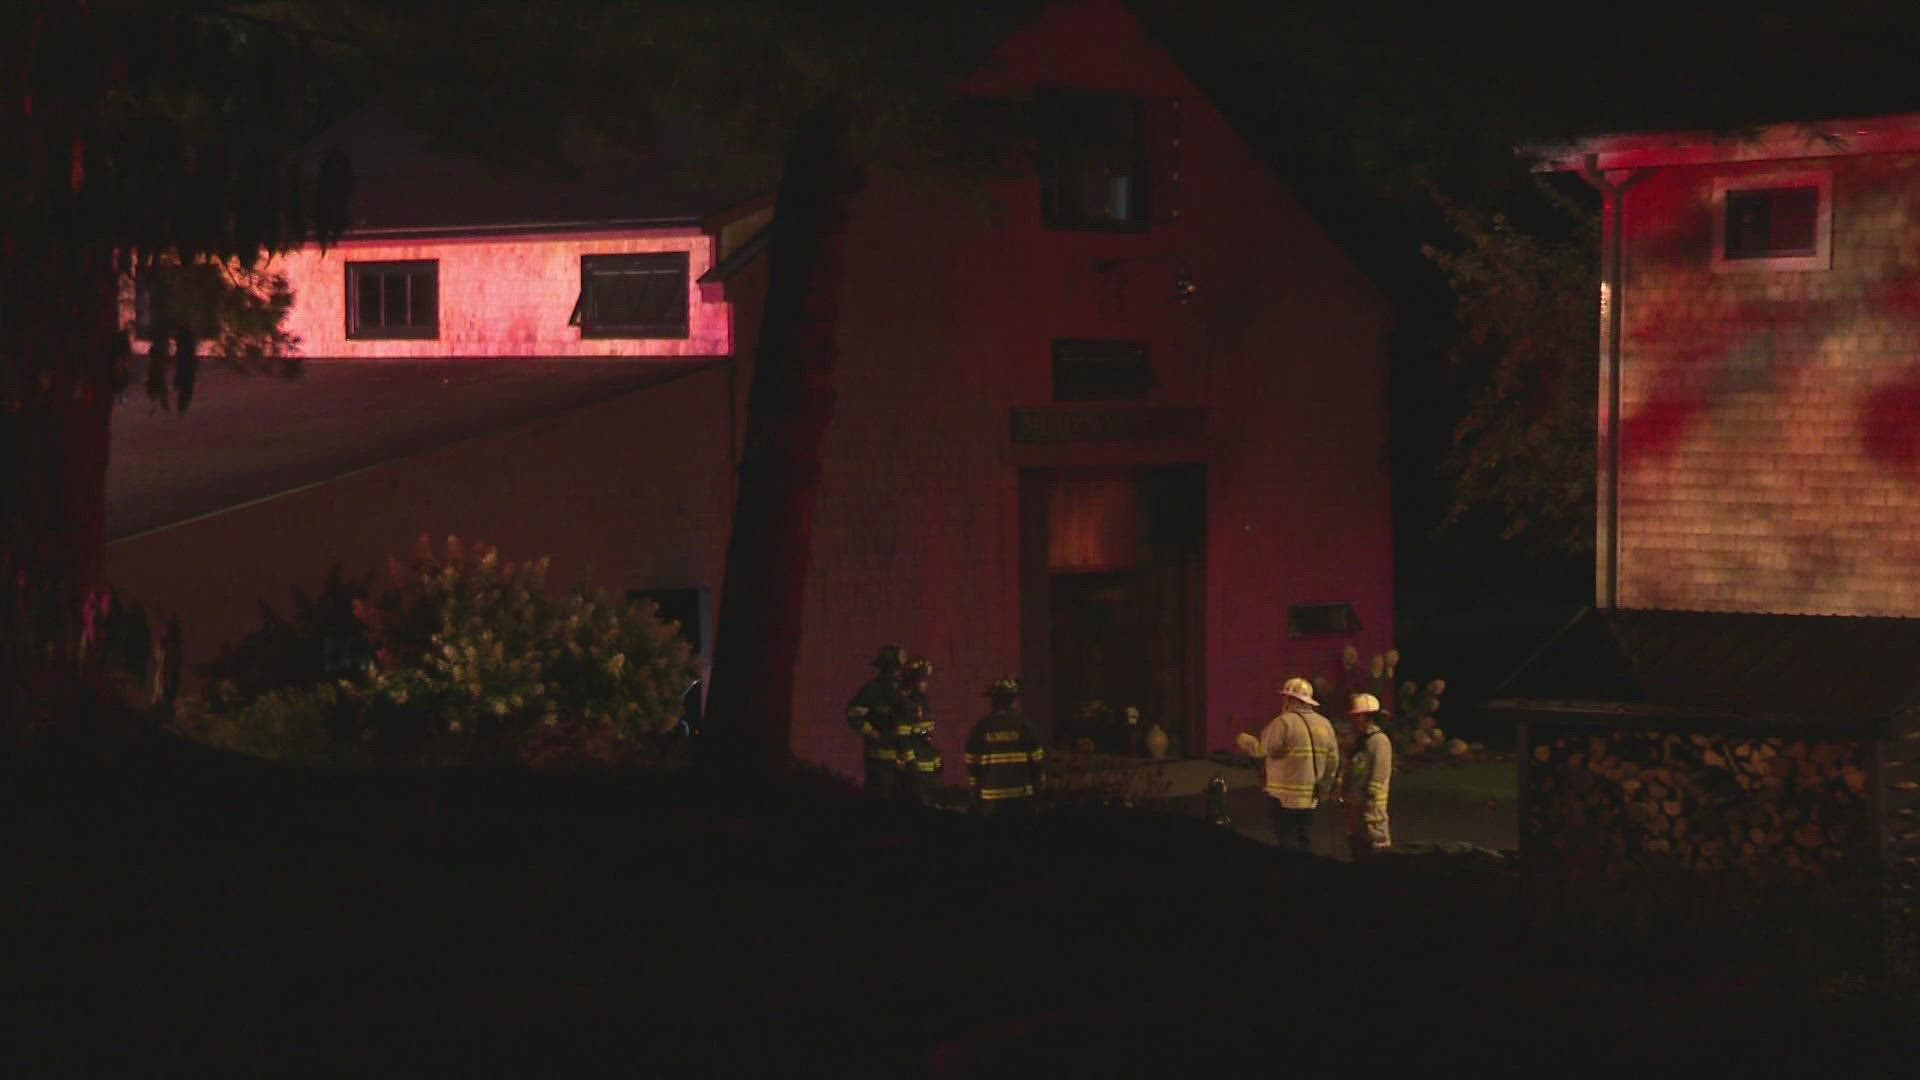 In Falmouth crews were on the scene of a fire tonight officials believe it was caused by a lightning strike